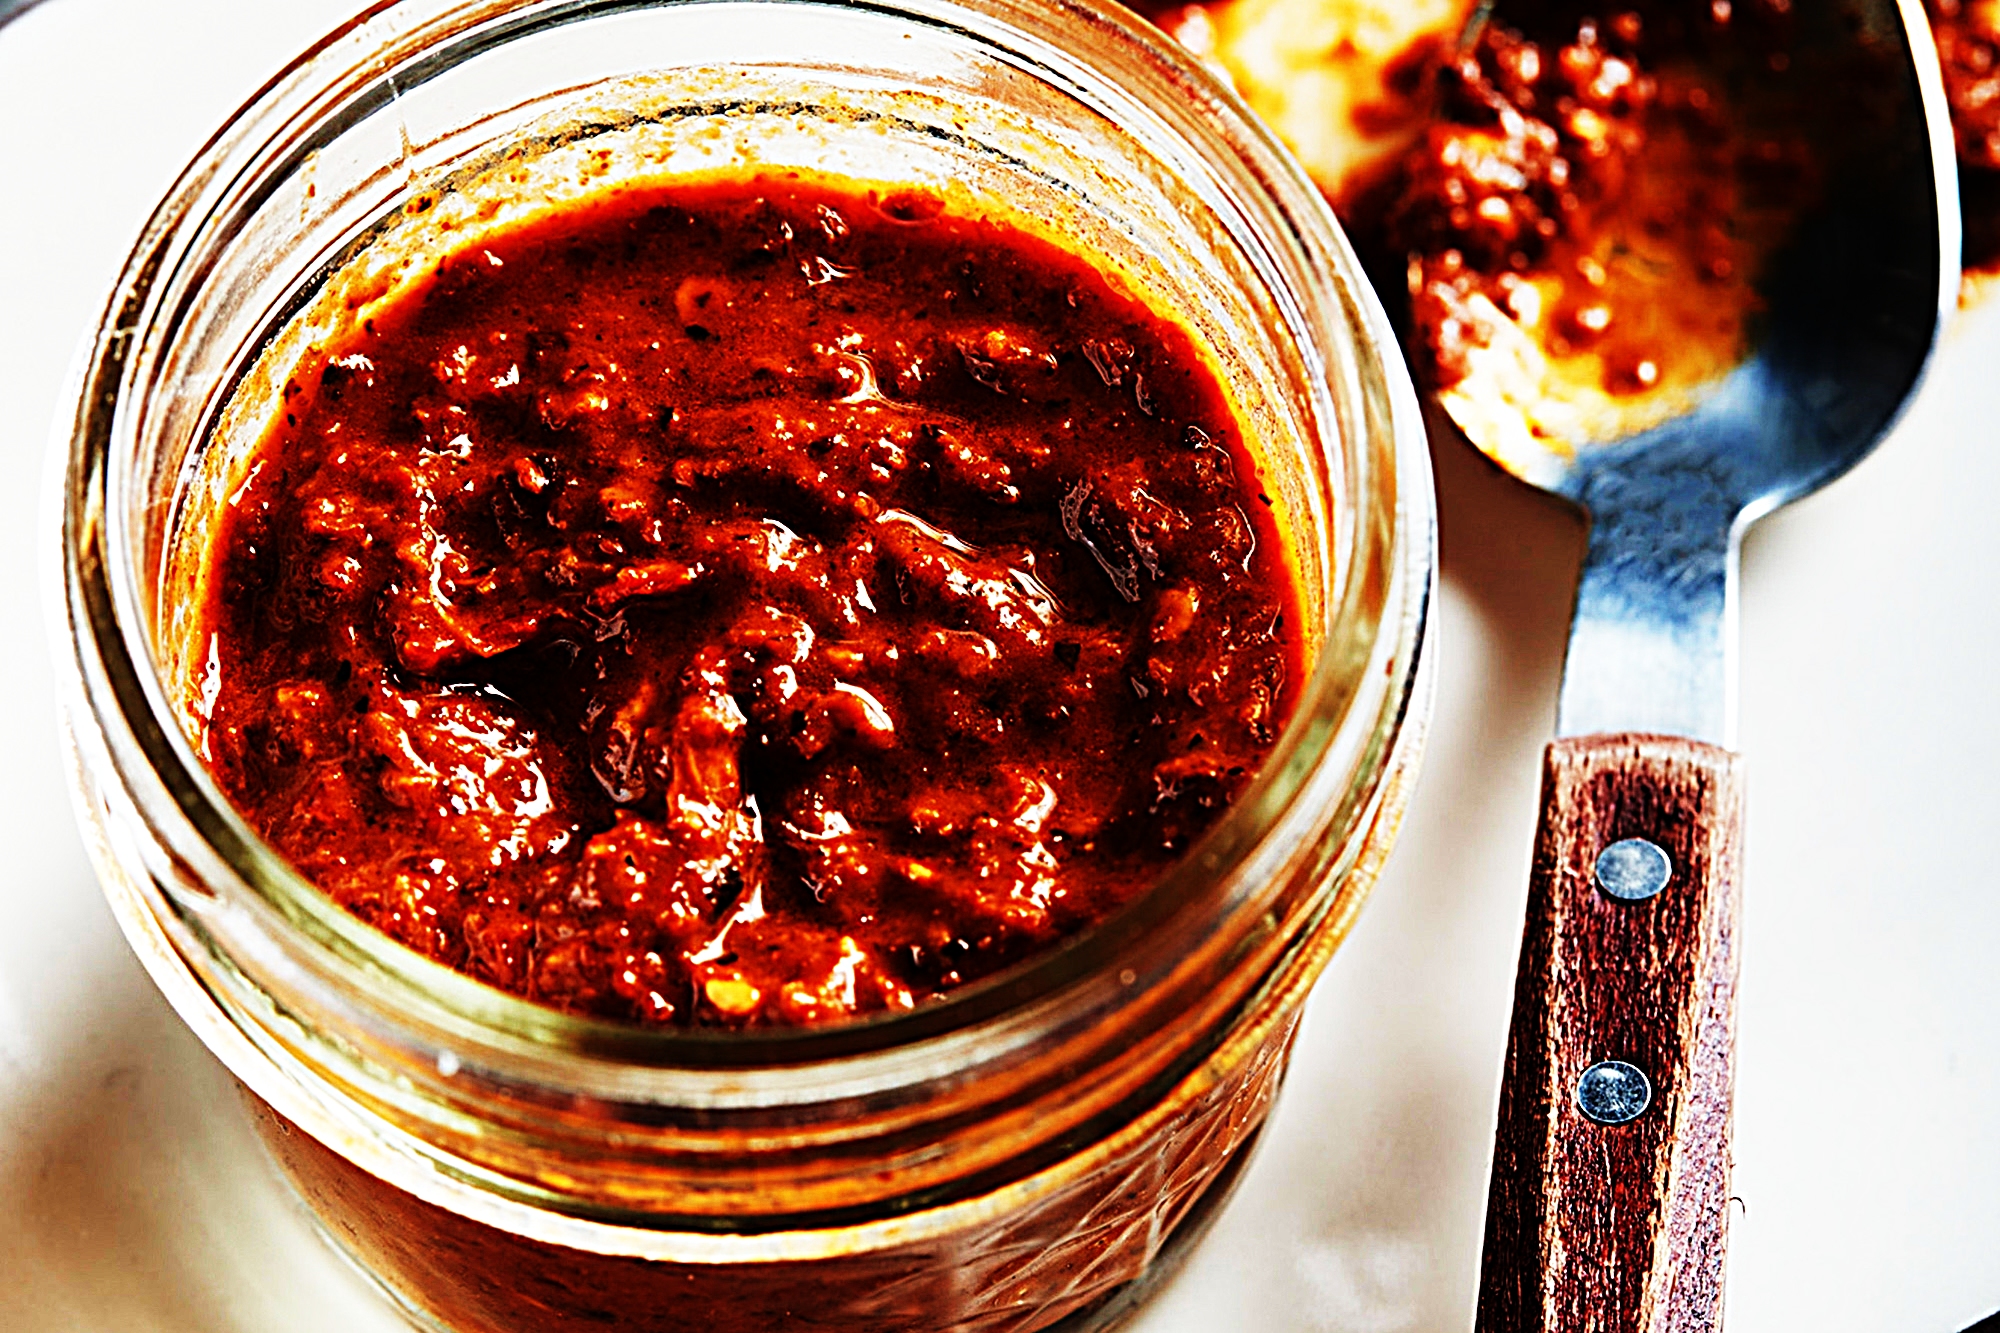 Stupid-Easy Recipe for Sambal Oelek (Chili Paste) (#1 Top-Rated)